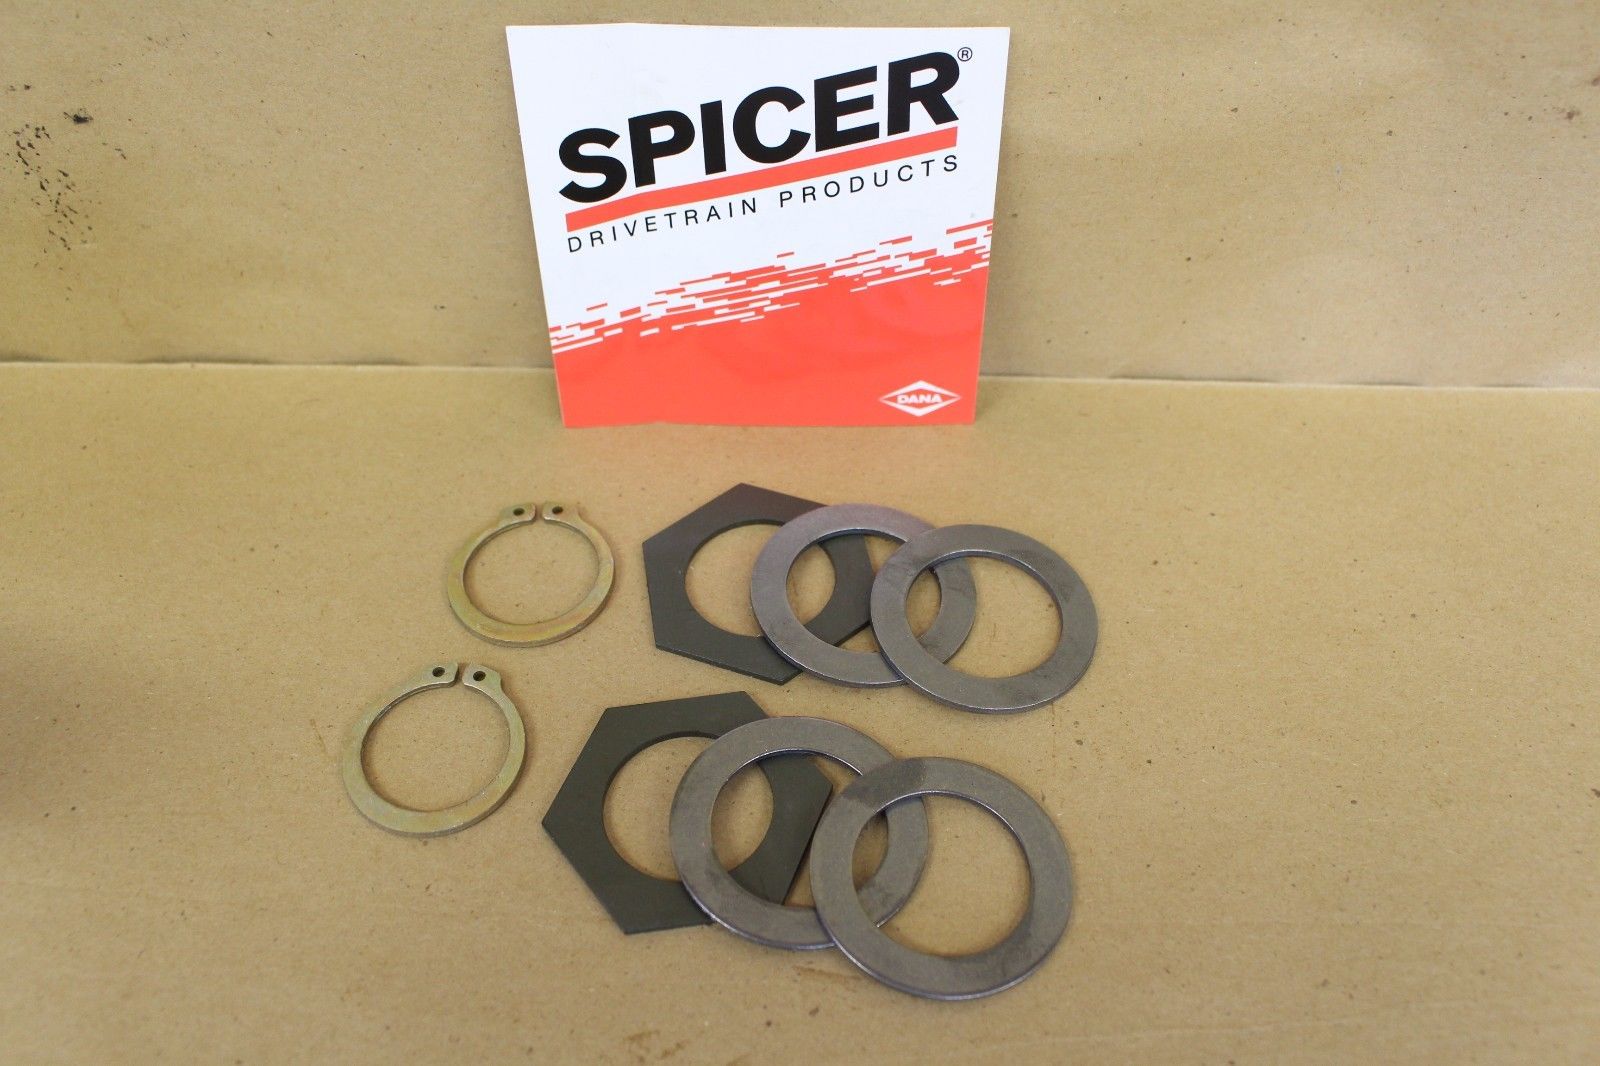 Spicer 50381 and Excursion 00-04 XiKe 1 Pcs 710413 Axle Shaft Seal Front Wheel F-350 92-04 F-250 93-04 99-04 Compatible National F-550 99-04. F-450 92-97 